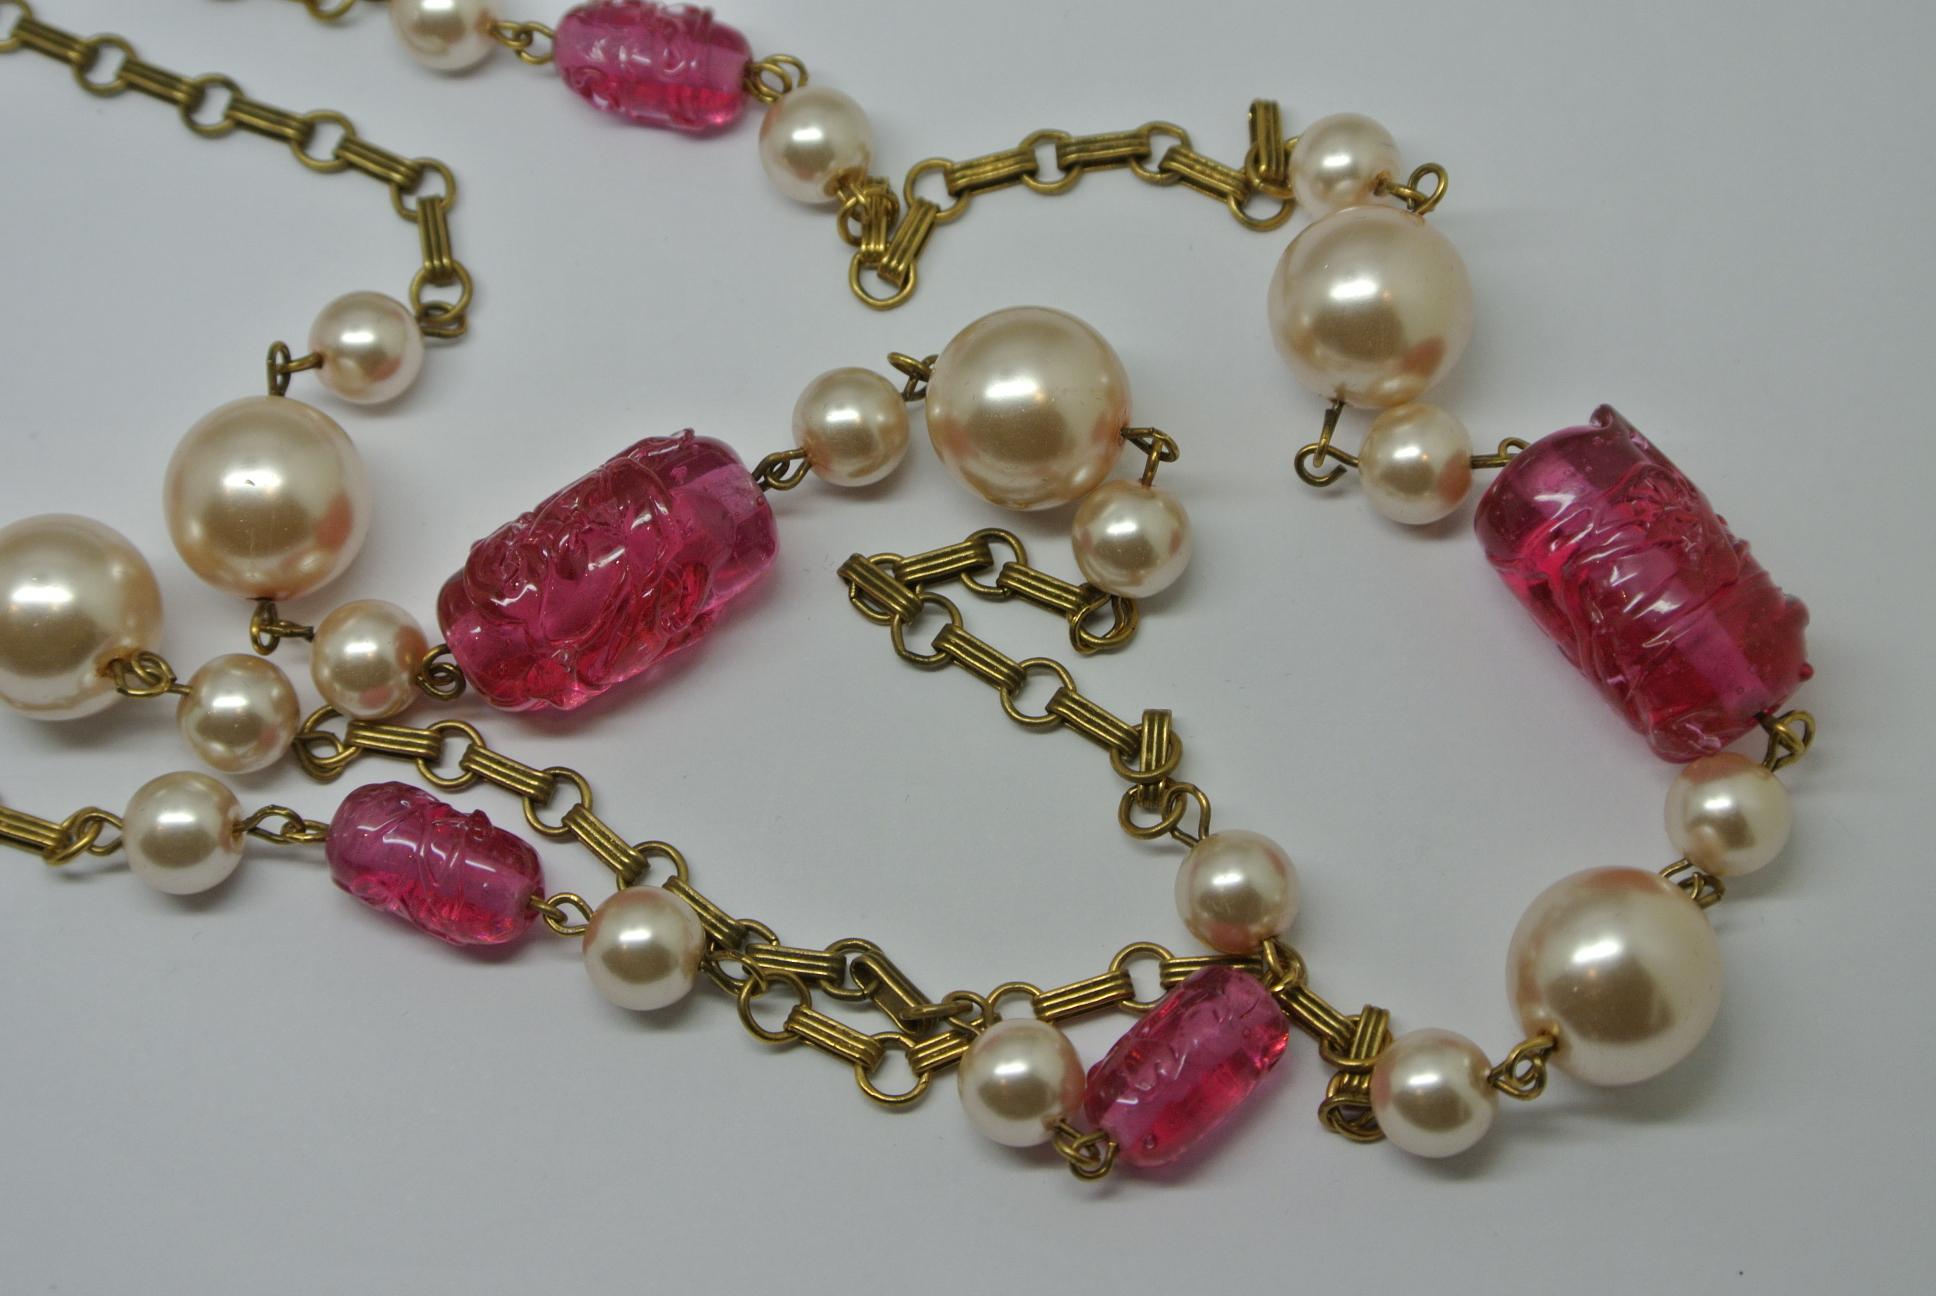 Chanel signed necklace
Made by Gripoix workshop
With red glass beads